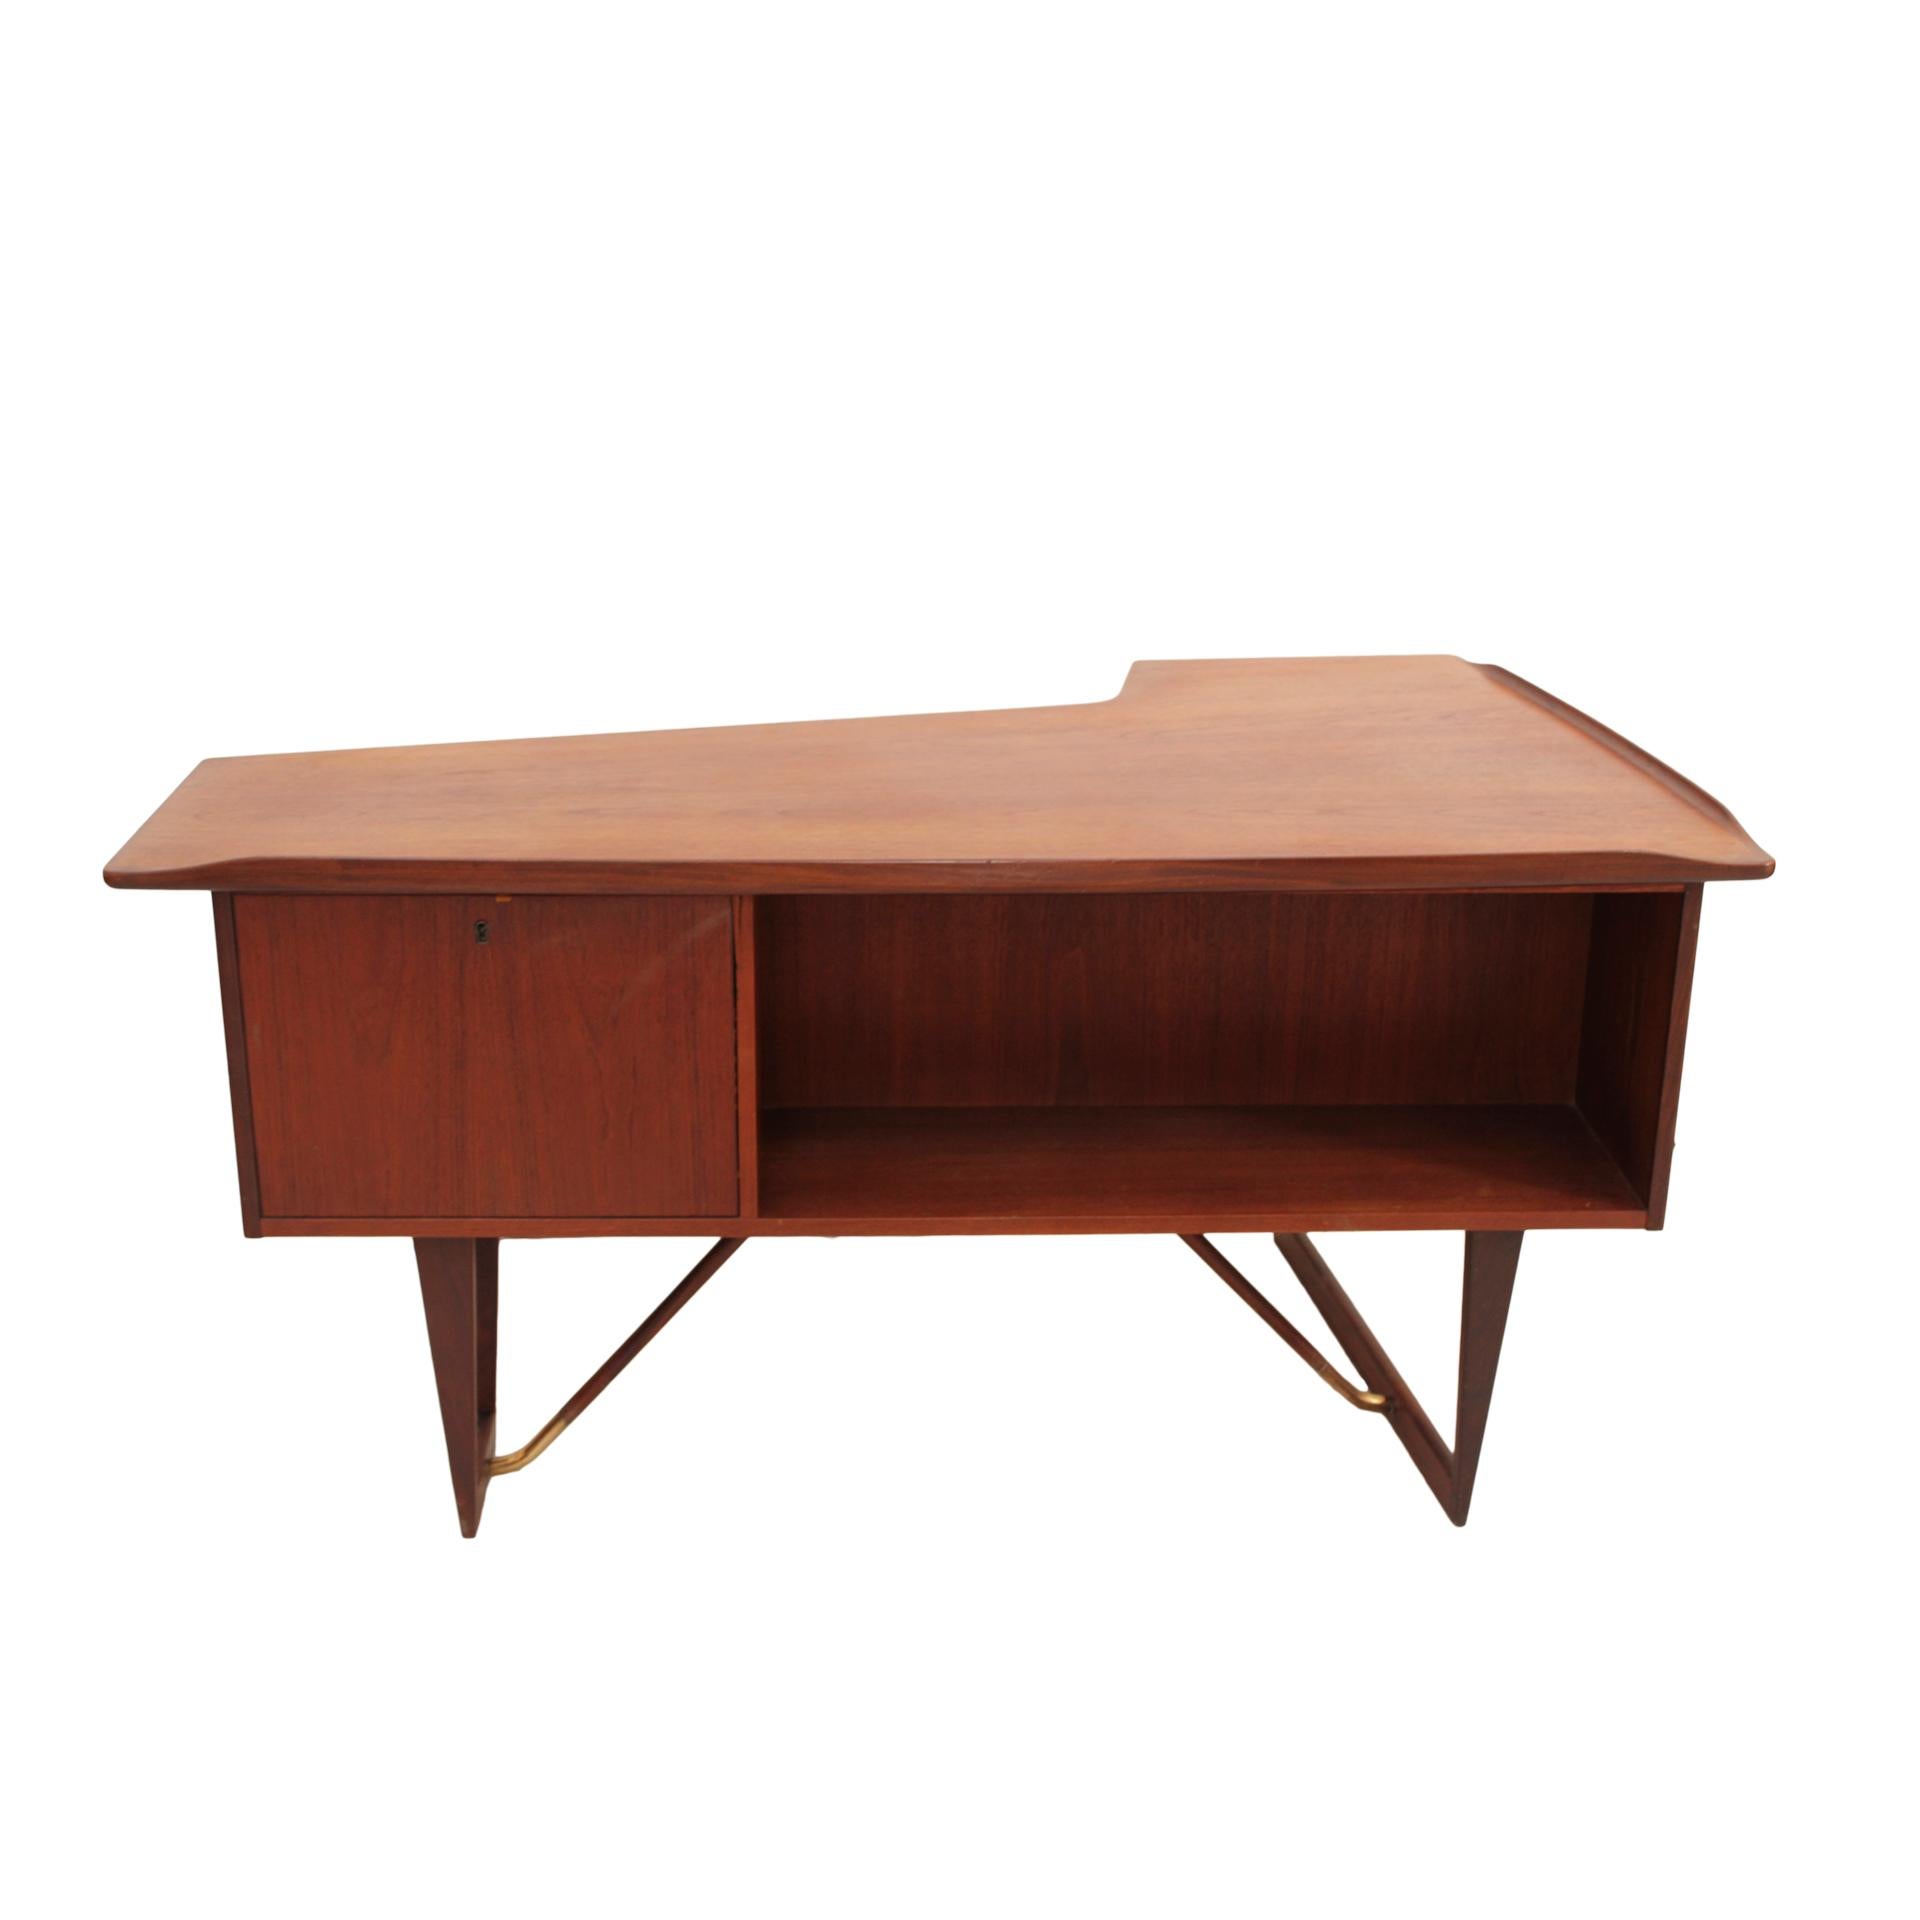 Mid-Century Modern Solid Wooden Desk Designed by Arne Vodder Boomerang  In Good Condition For Sale In Ibiza, Spain